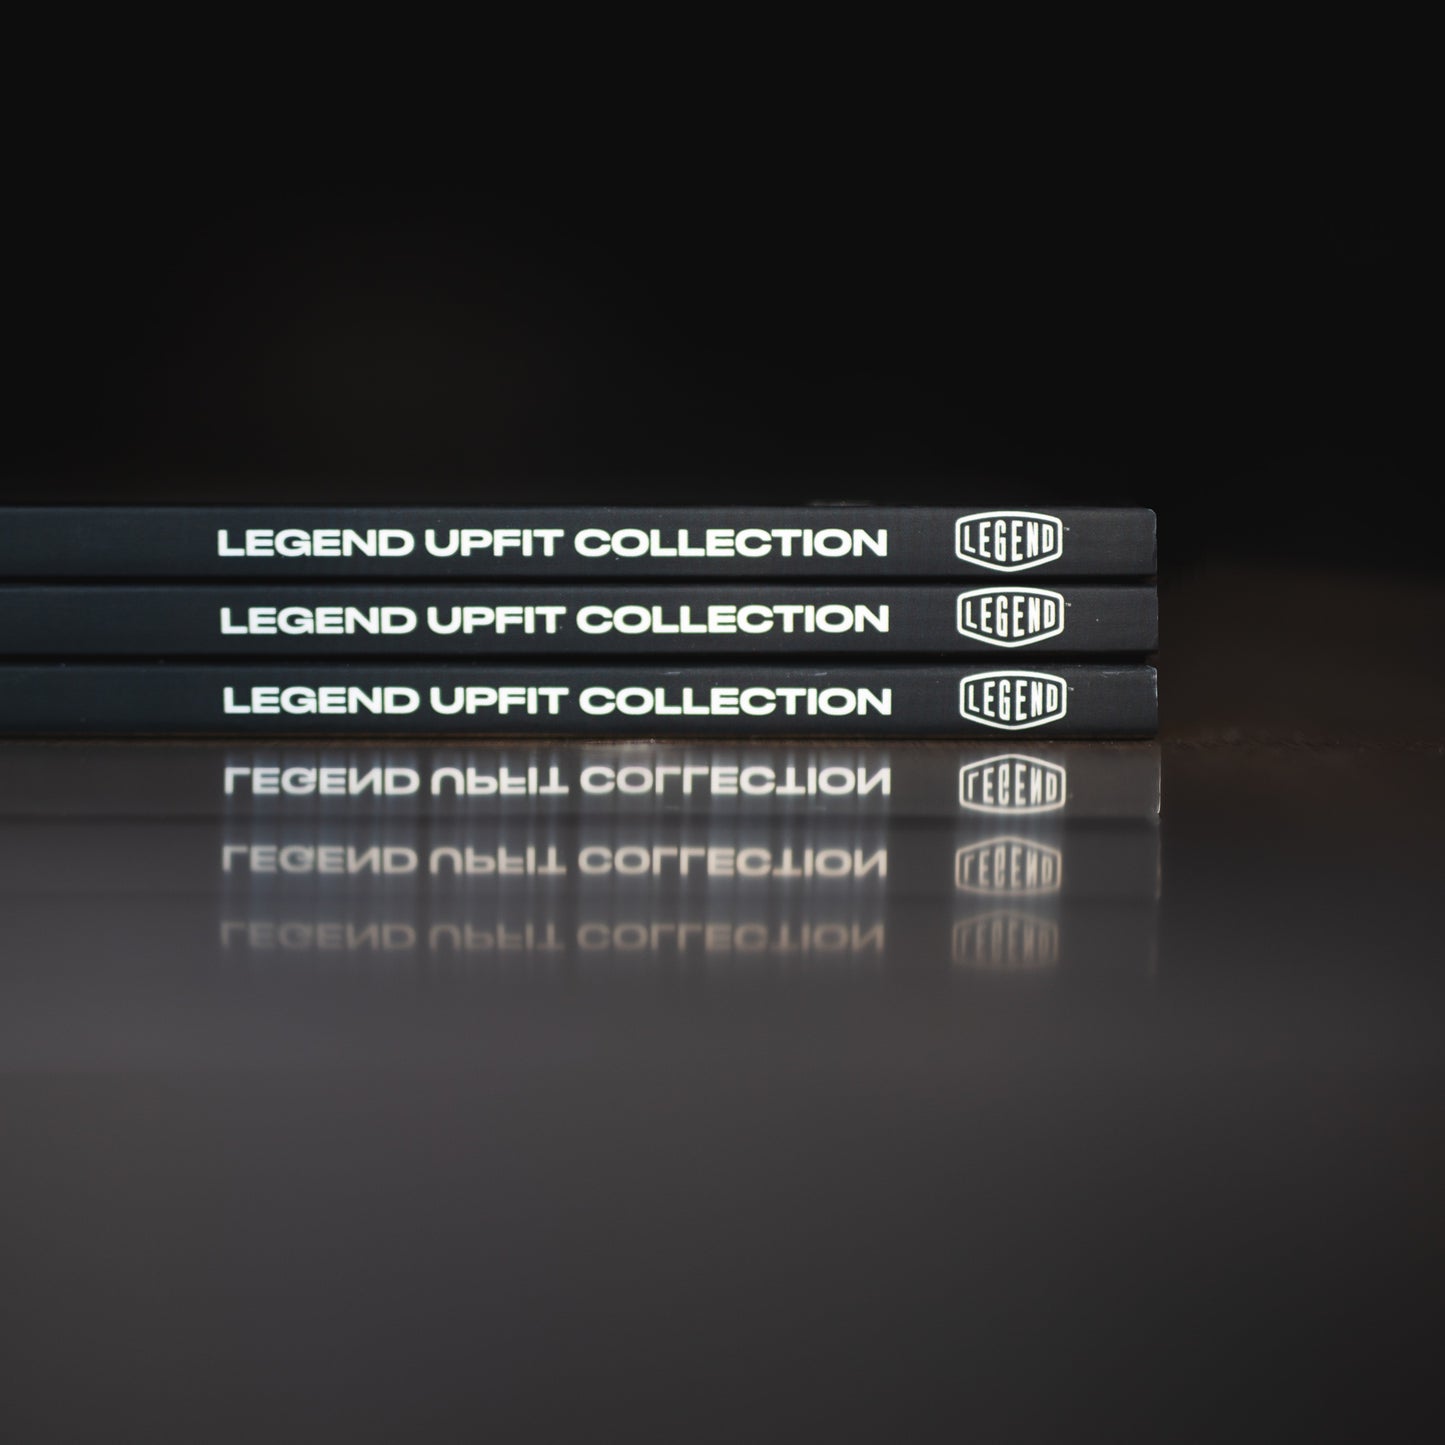 The LEGEND™ Upfit Collection: Full-Line Brochure